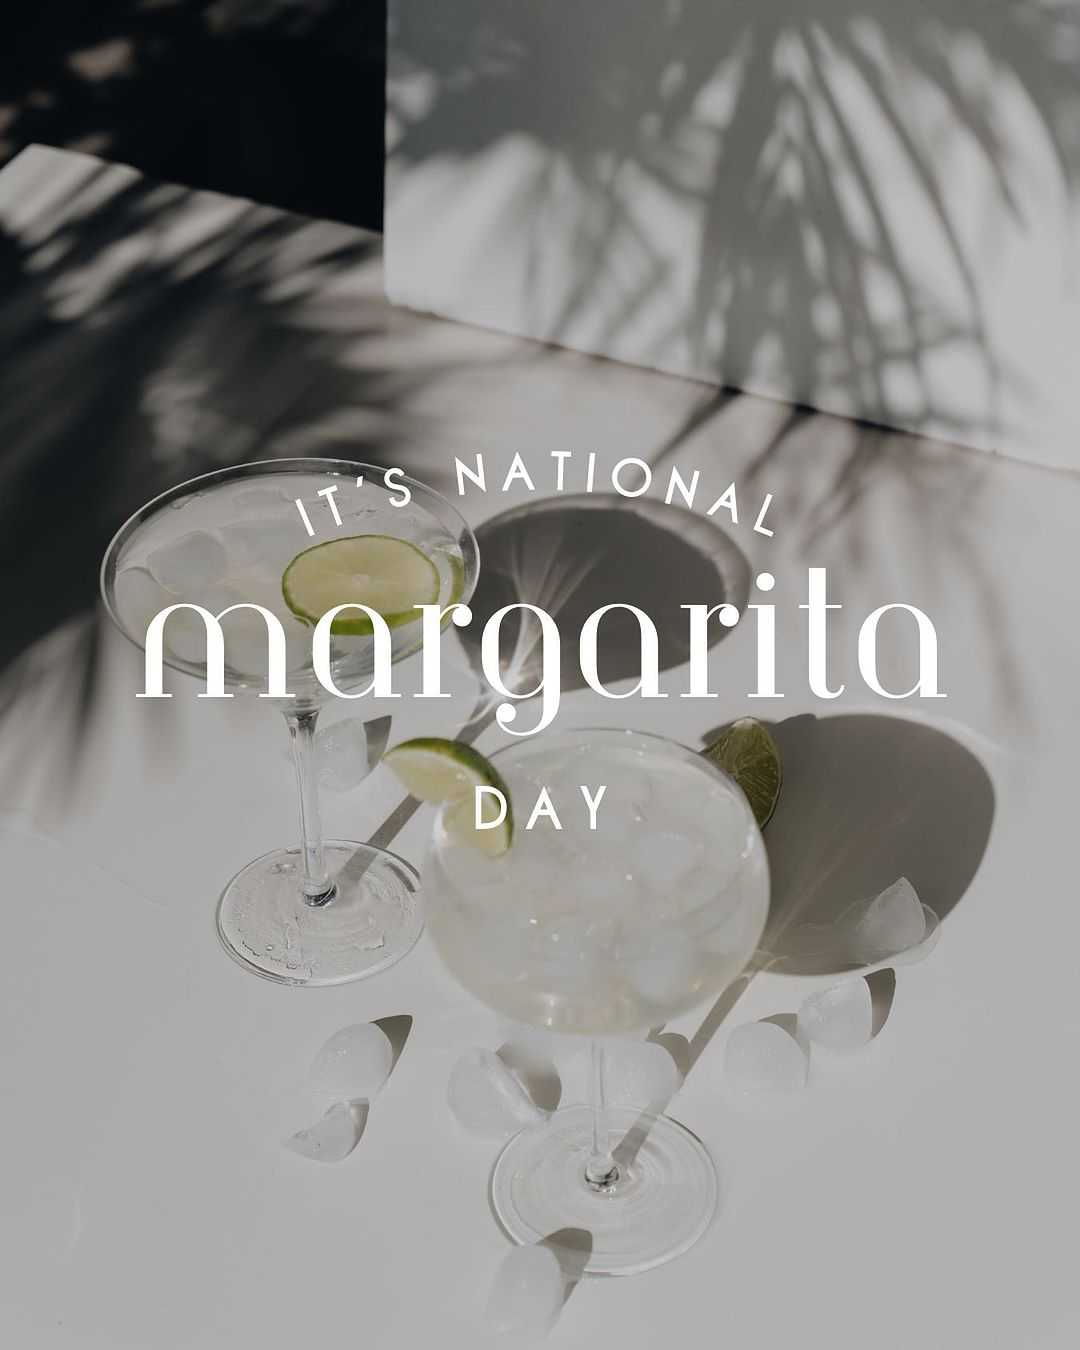 National Margarita Day is calling, and we are answering 🍹⁠
⁠
Grab a margarita at ⁠
@moxies or a ‘Tequila Fix’ at ⁠
@sixtyvinesuptown⁠
⁠
Who’s celebrating with us? ⬇️⁠
⁠
.⁠
.⁠
.⁠
#NationalMargaritaDay #TheCrescent #DallasMargaritas⁠ #MargaritaDay⁠ #DallasCheers⁠ #TequilaTimeDallas⁠ #DallasSips #MoxiesDallas #SixtyVinesDallas ⁠